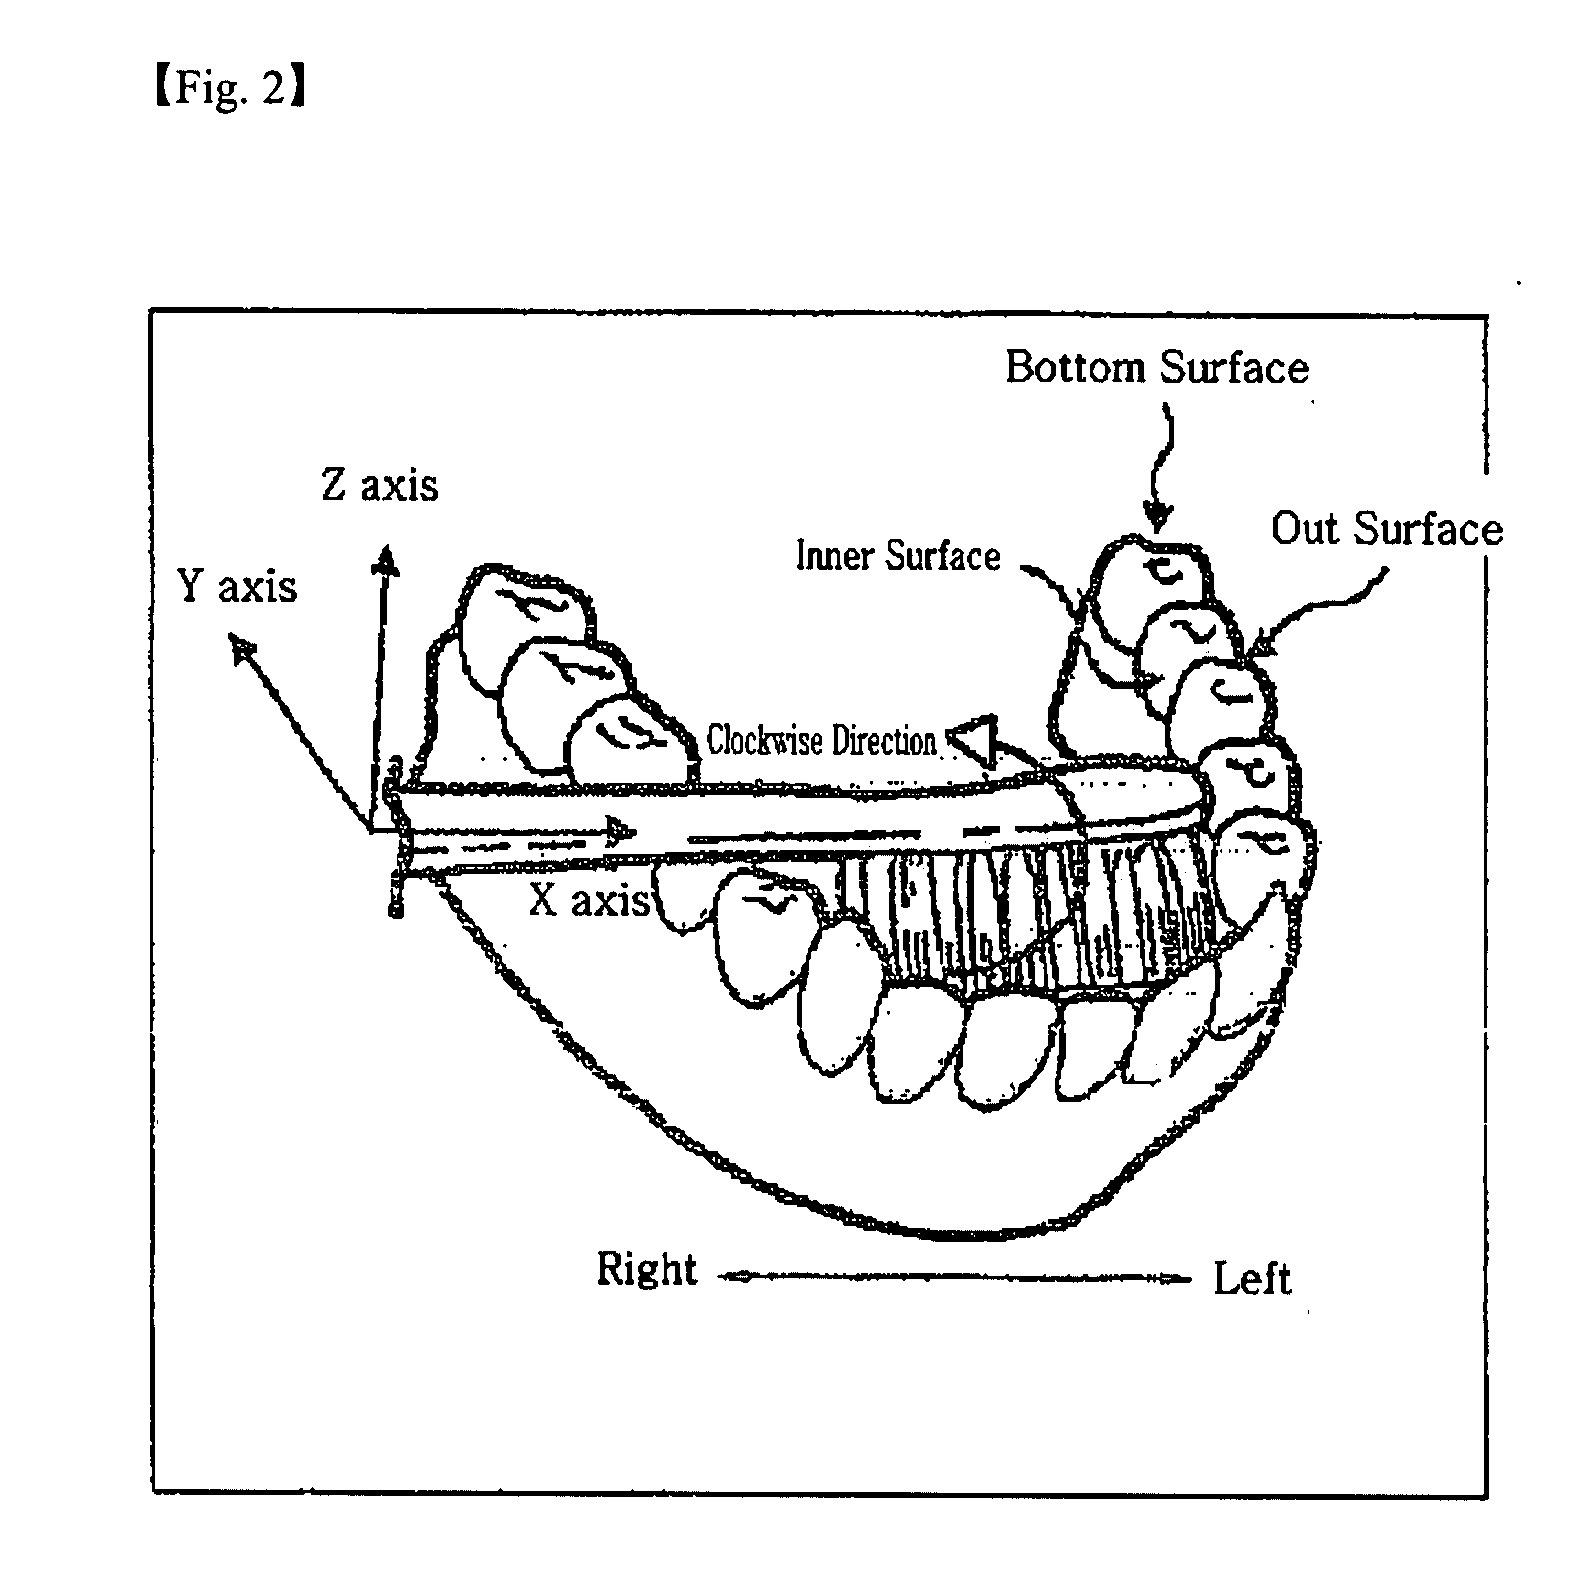 Tooth brushing pattern analyzing/modifying device, method and system for interactively modifying tooth brushing behavior